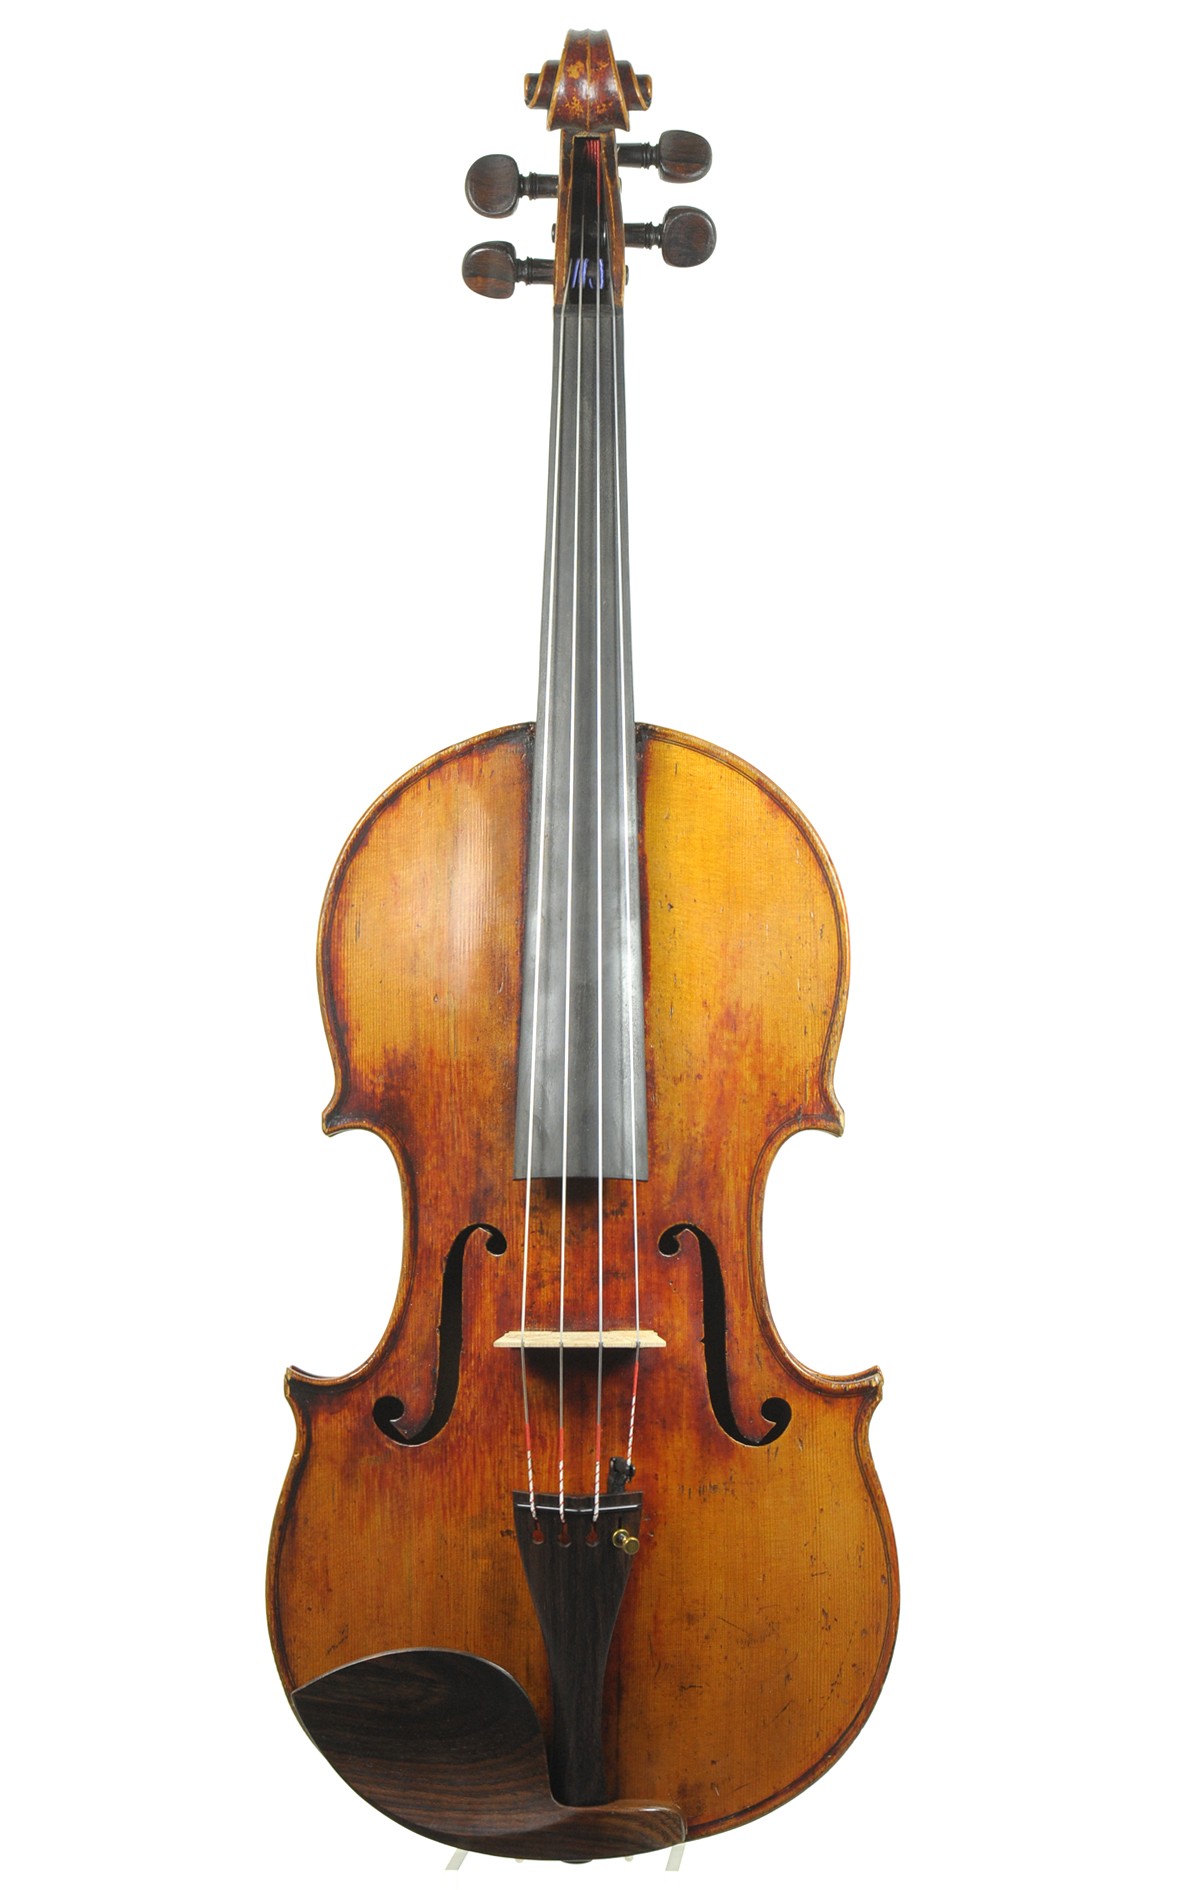 Interesting viola from around 1800, probably English - top